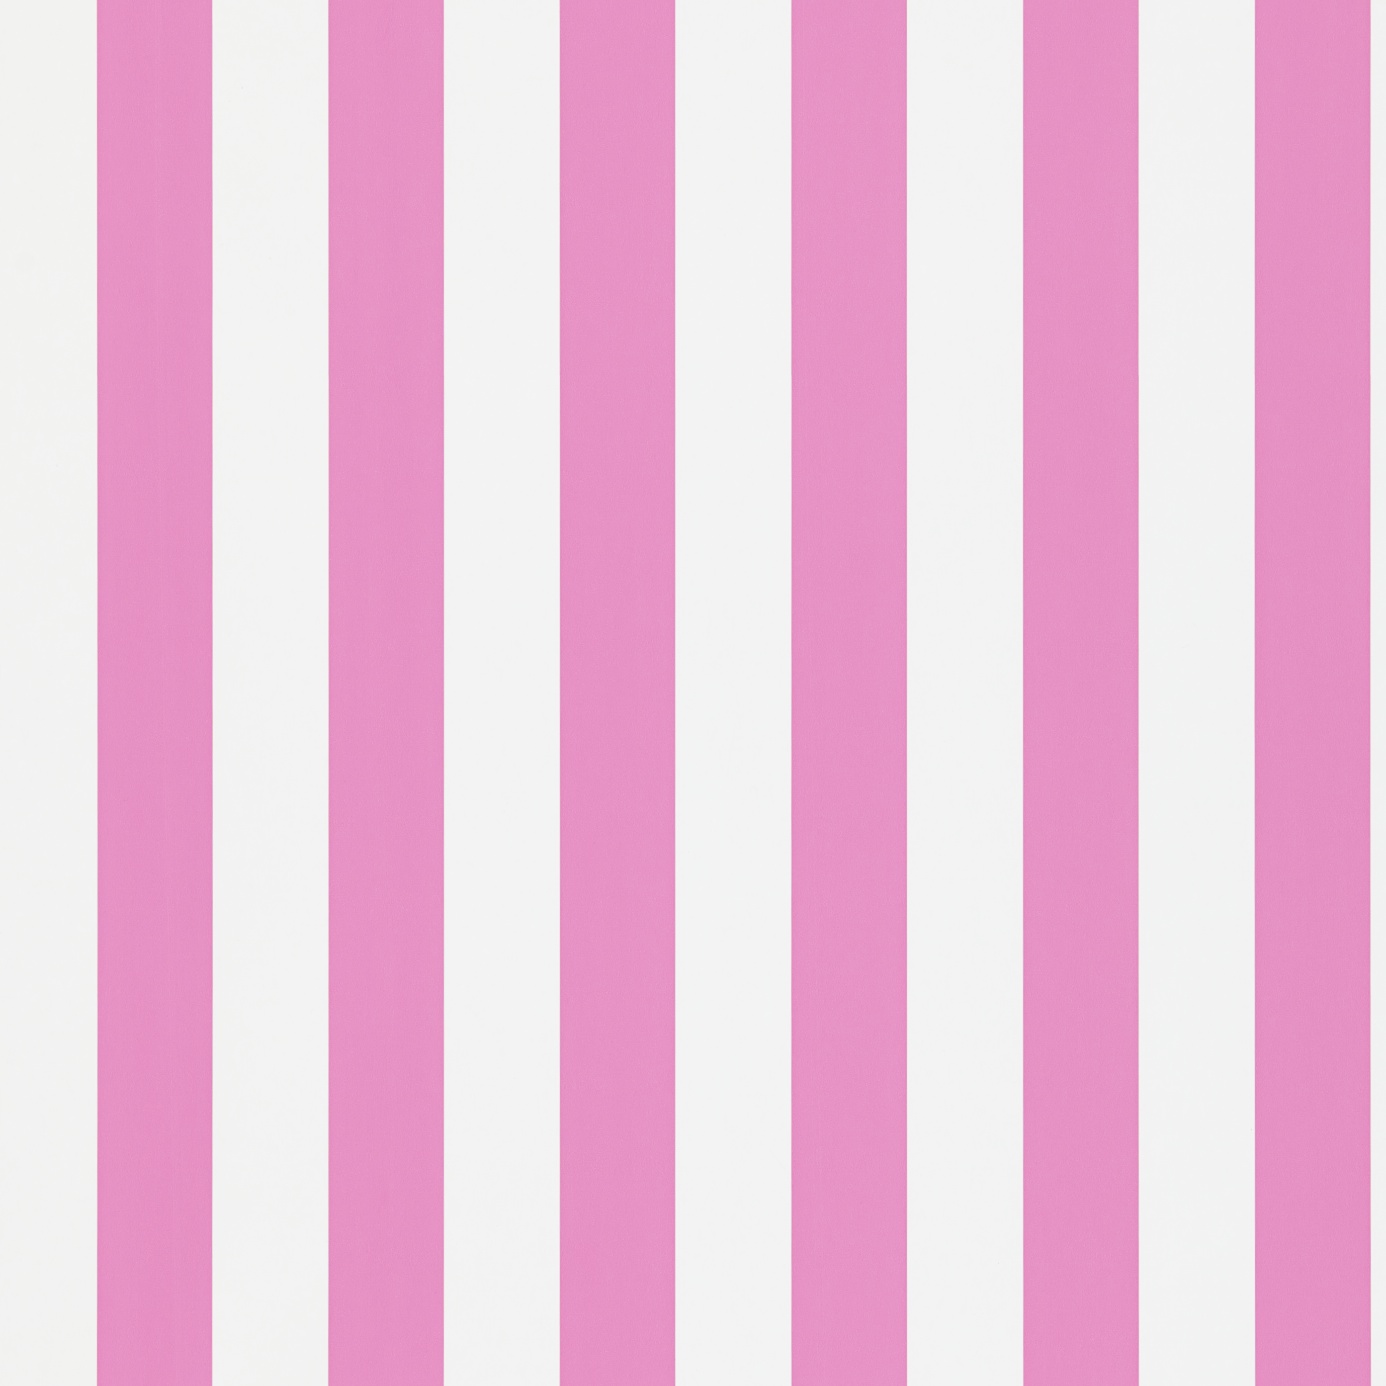 HD desktop wallpaper Abstract Pink Stripes Geometry download free  picture 941818